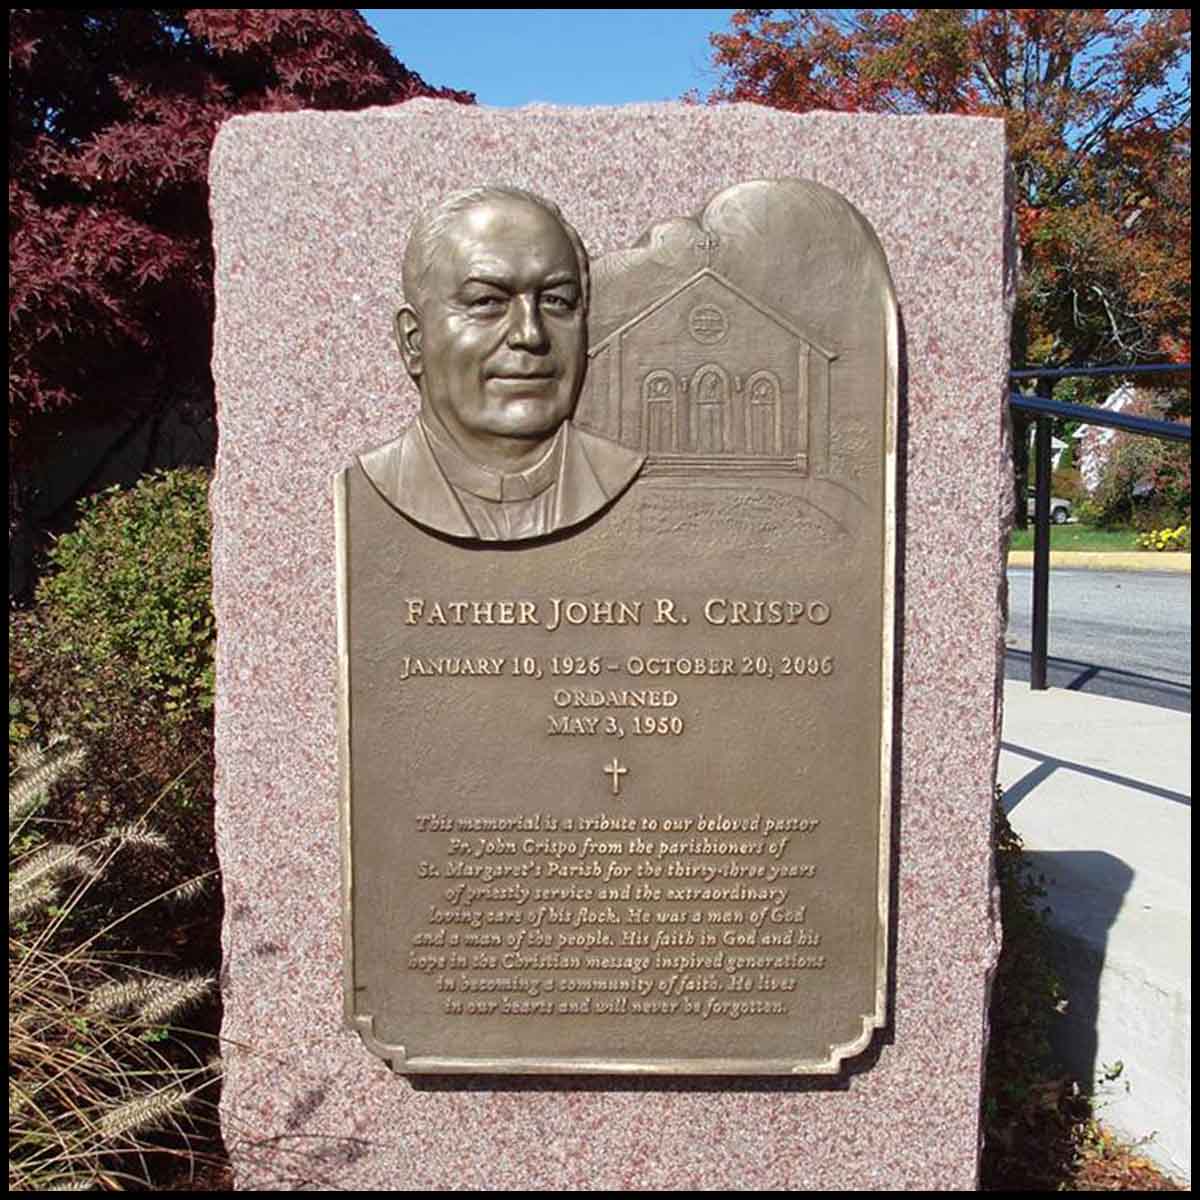 photo of bronze-colored plaque with portrait of John Crispo mounted on granite in landscaped area with walkway with railing and trees behind